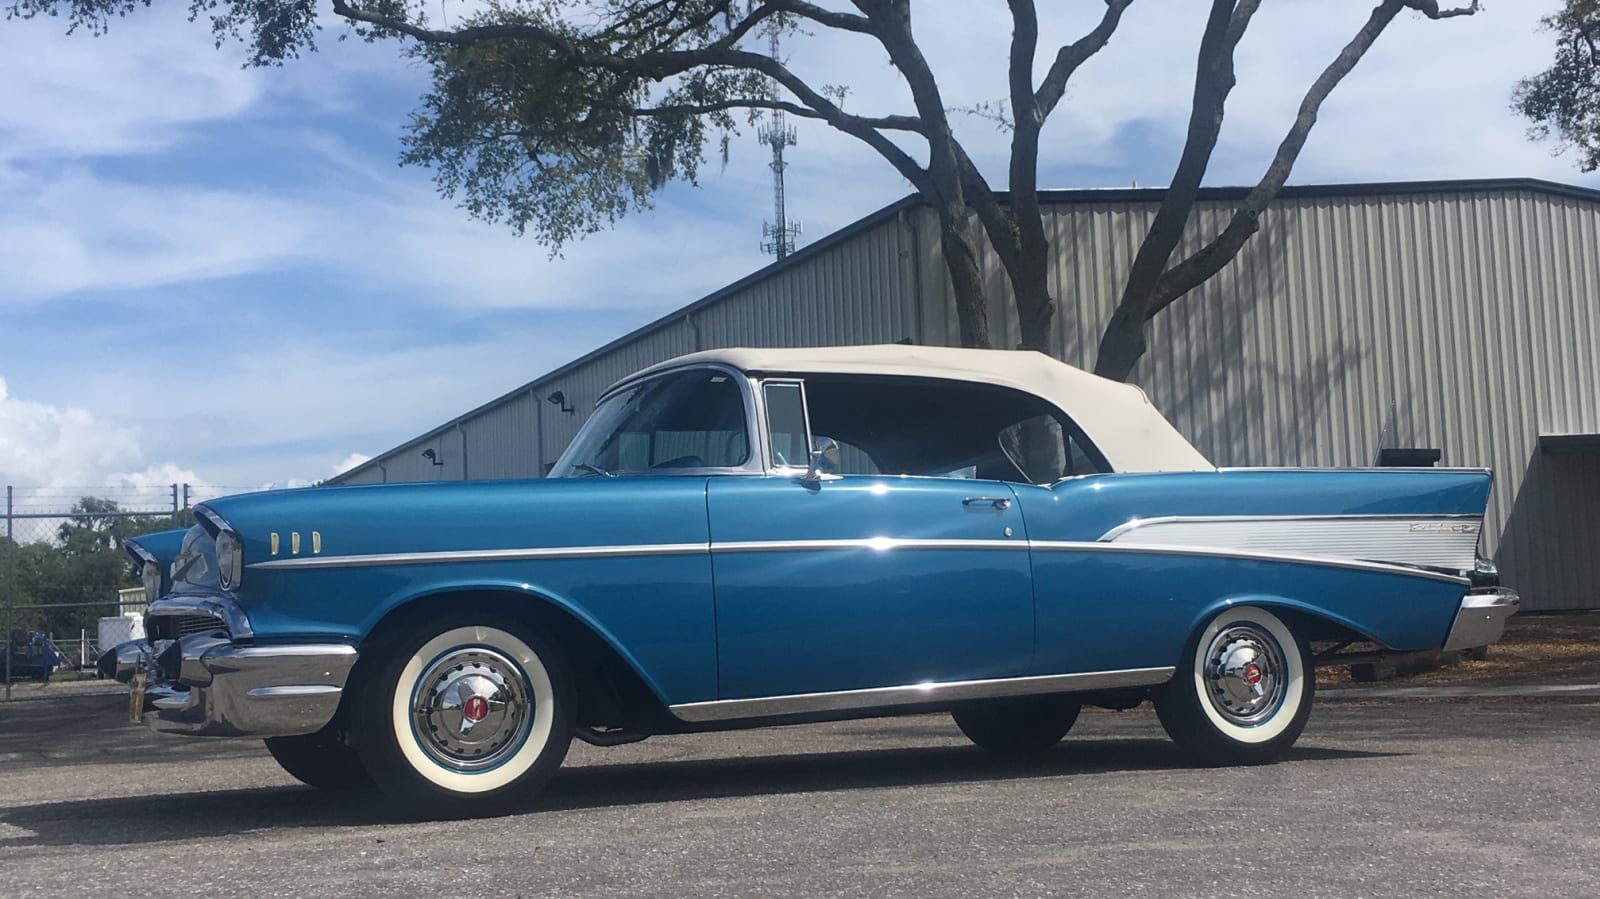 1957 Chevrolet Bel Air Convertible at Indy 2019 as F97 - Mecum Auctions